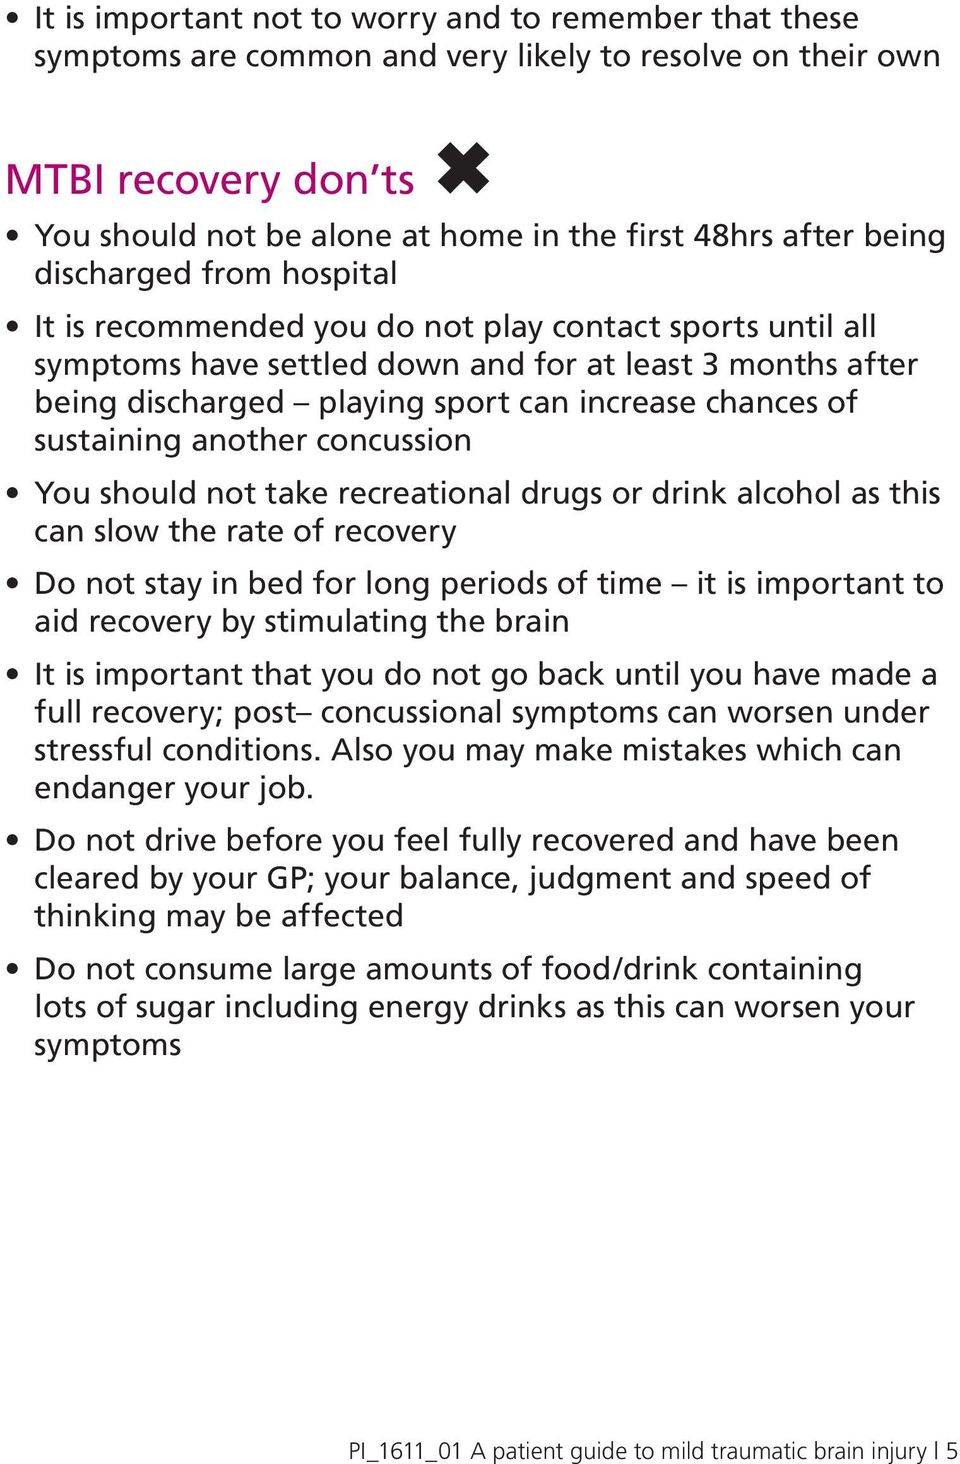 sustaining another concussion You should not take recreational drugs or drink alcohol as this can slow the rate of recovery Do not stay in bed for long periods of time it is important to aid recovery